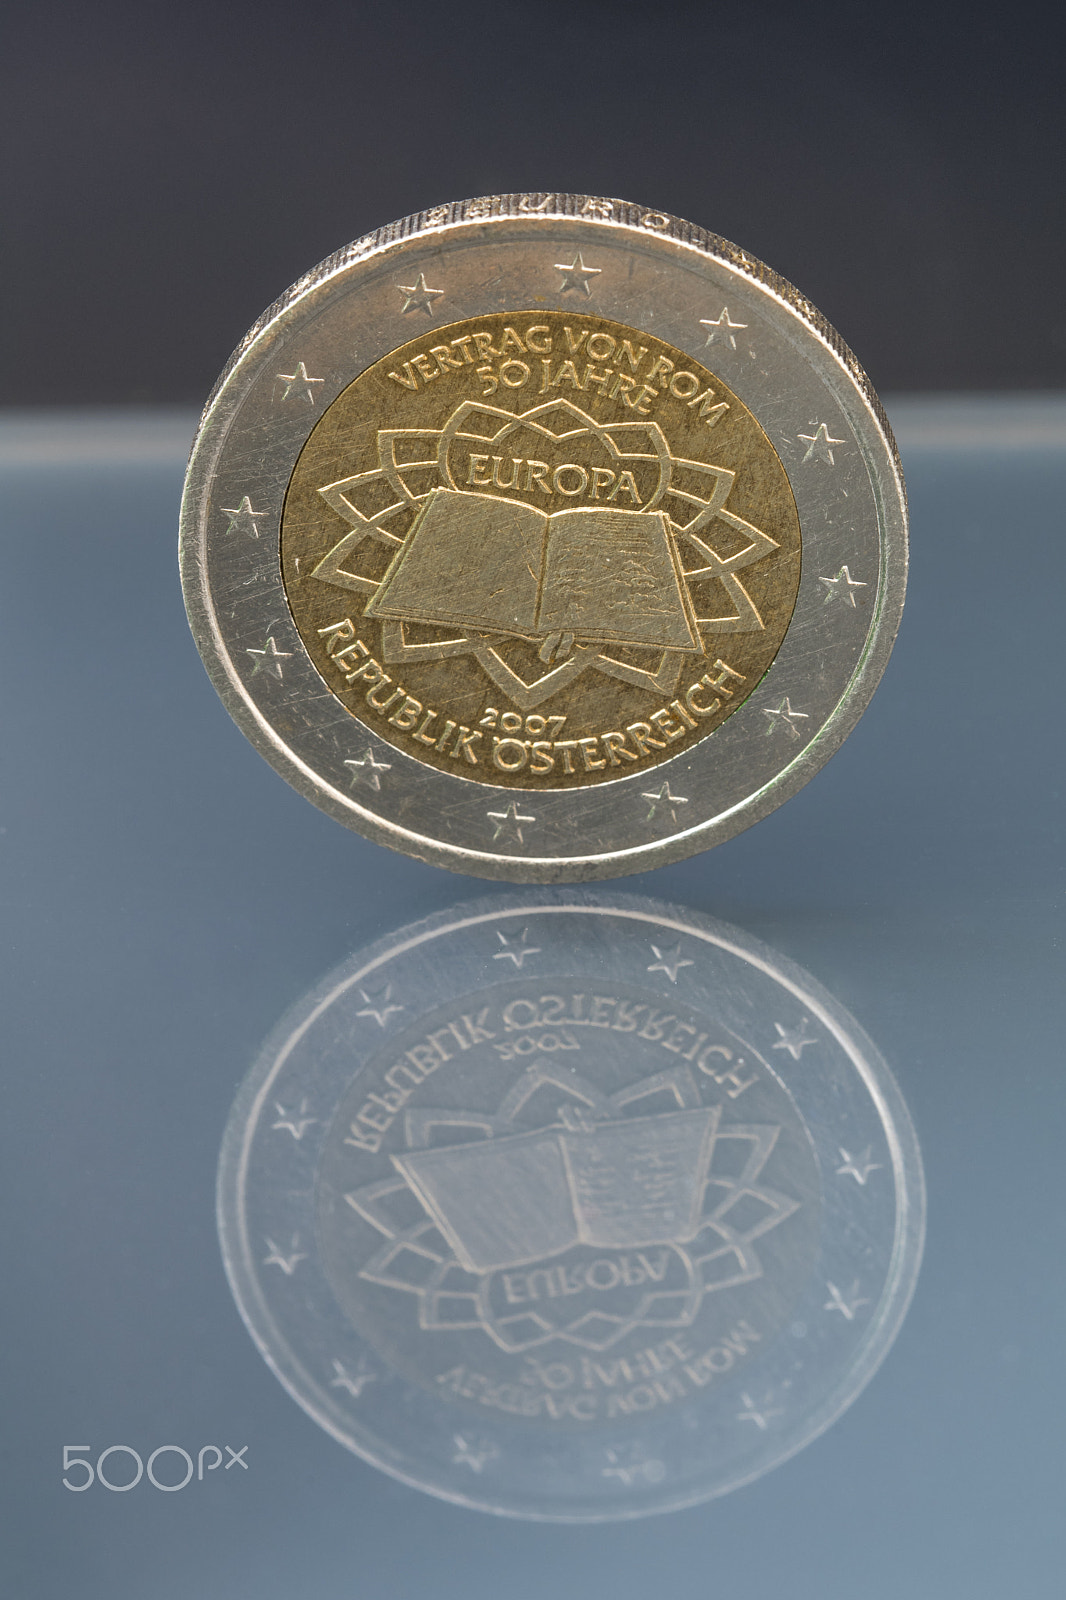 Nikon D500 + Sigma 105mm F2.8 EX DG OS HSM sample photo. Commemorative 2 eur coin, 50th anniversary treaty of rome, issue photography